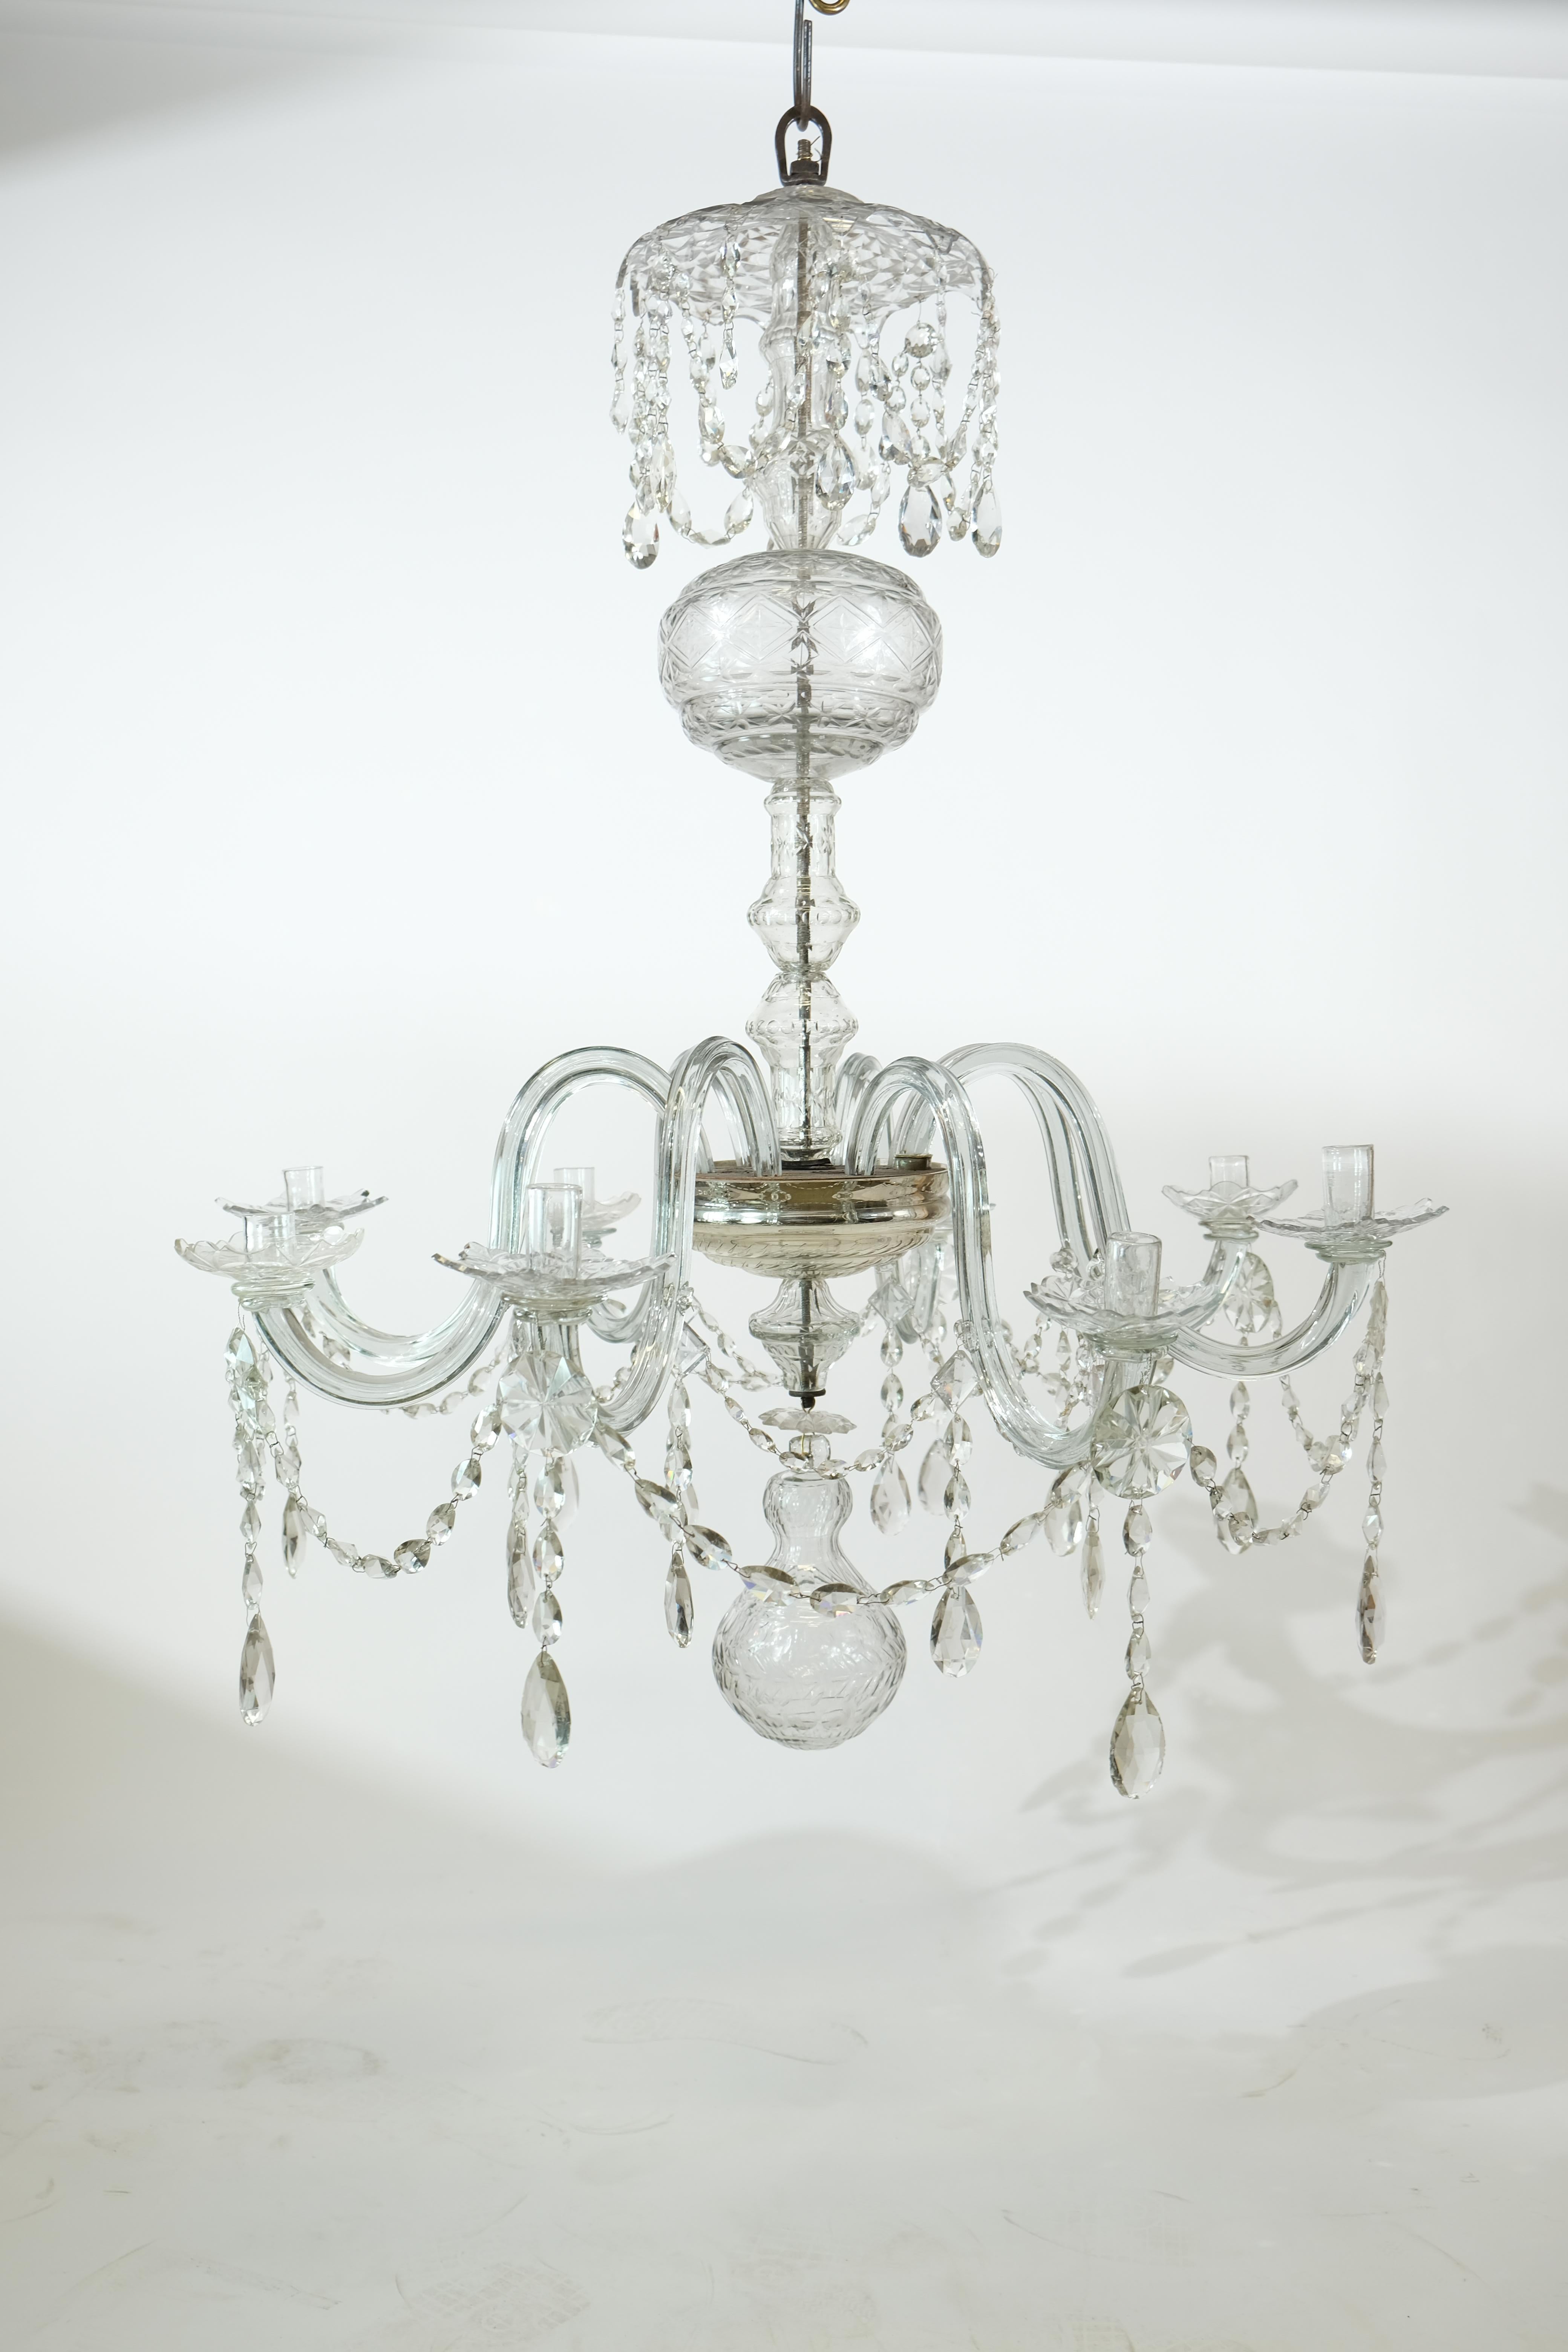 A large high quality 18th c chandelier. Most probably English. It has eight arms of glass that holds the candleholders. The central part is made up by several cut glass bulbs and bottles. The quality of the cut crystal is very high. On top of the